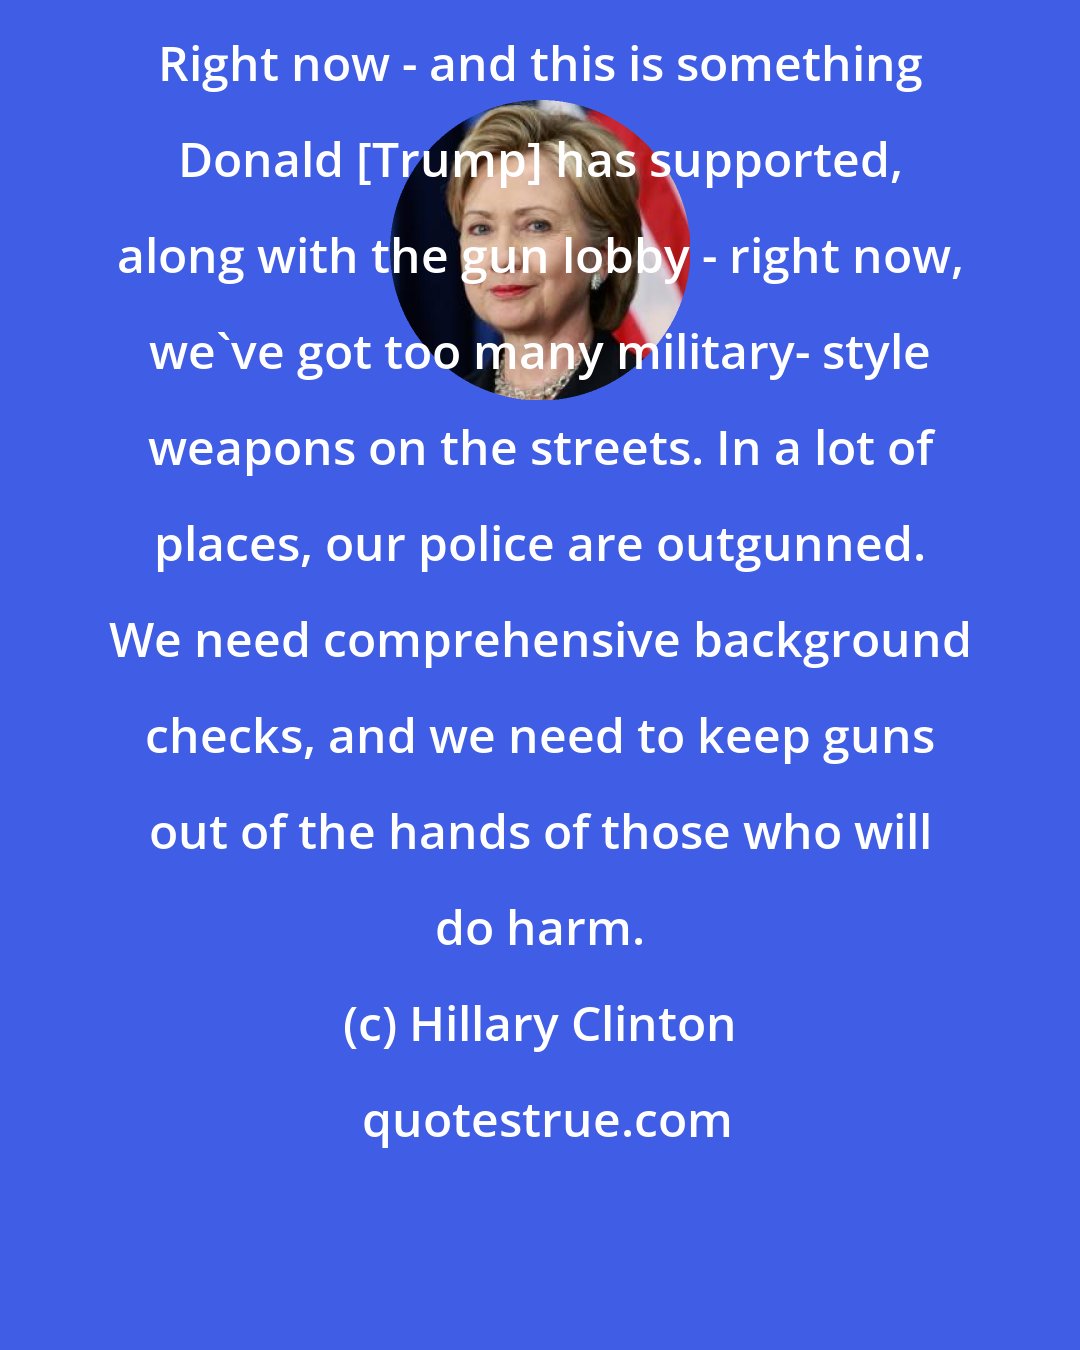 Hillary Clinton: Right now - and this is something Donald [Trump] has supported, along with the gun lobby - right now, we've got too many military- style weapons on the streets. In a lot of places, our police are outgunned. We need comprehensive background checks, and we need to keep guns out of the hands of those who will do harm.